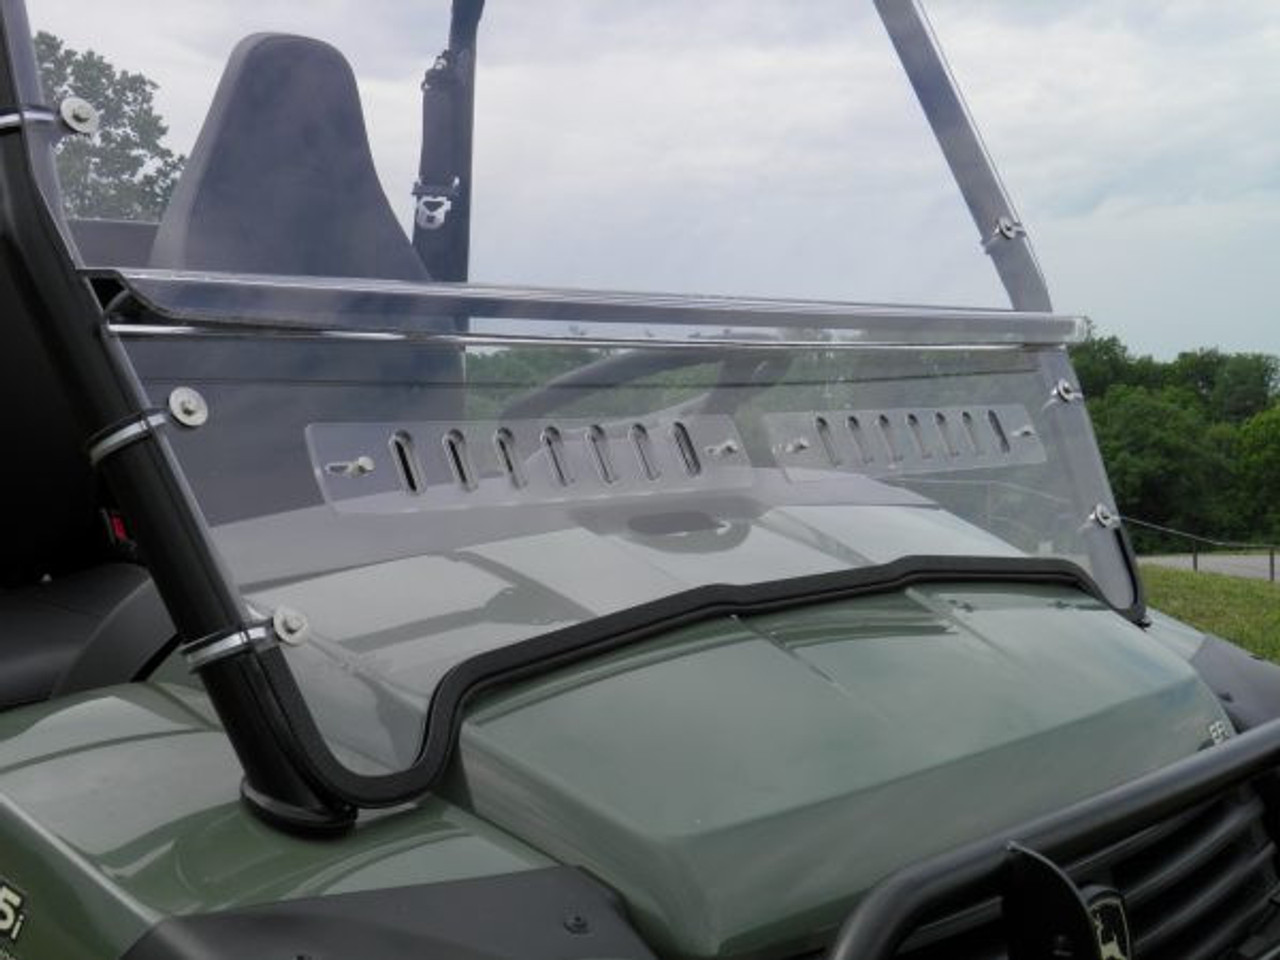 3 Star side x side John Deere HPX/XUV windshield front angle view close up